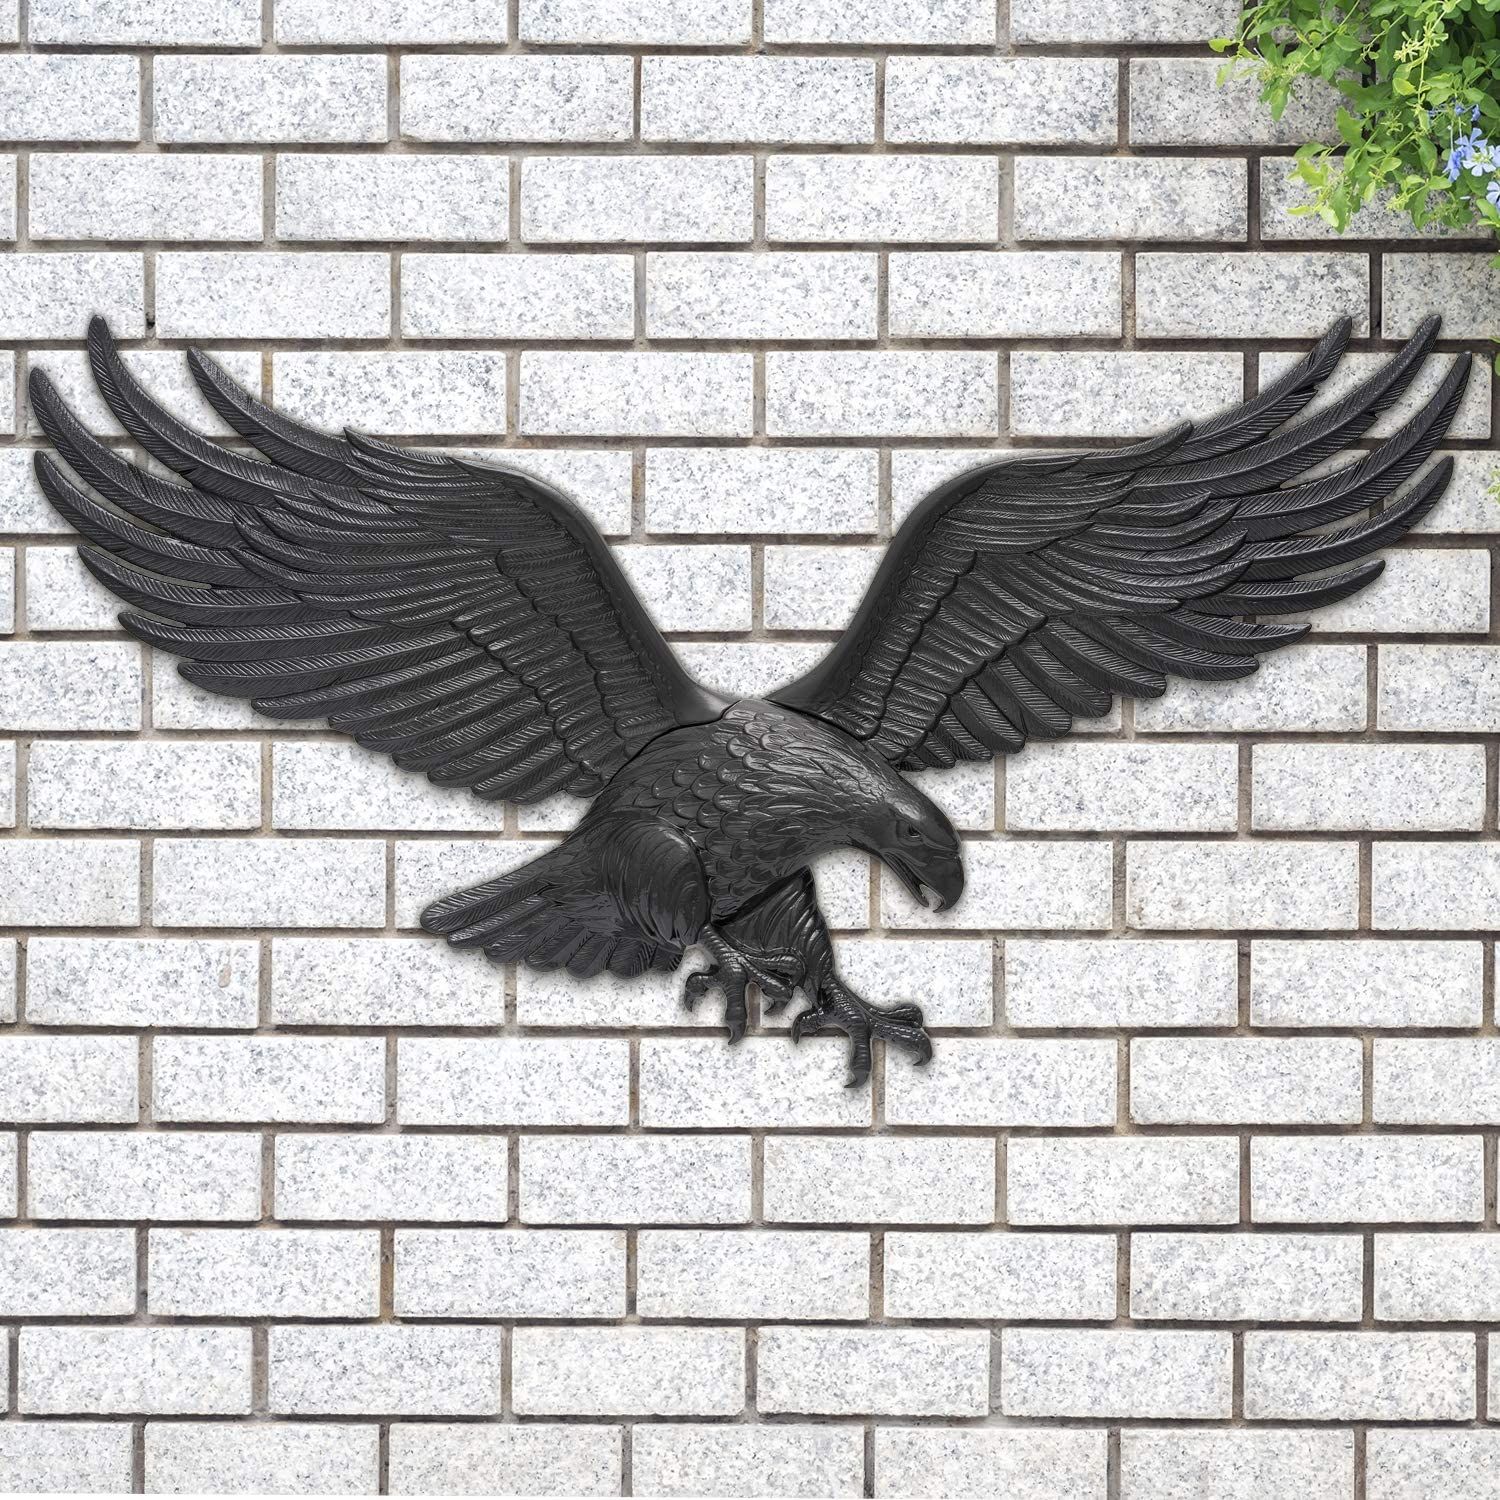 36" Eagle Wall Decor – Black With Recent Eagle Wall Art (View 13 of 20)